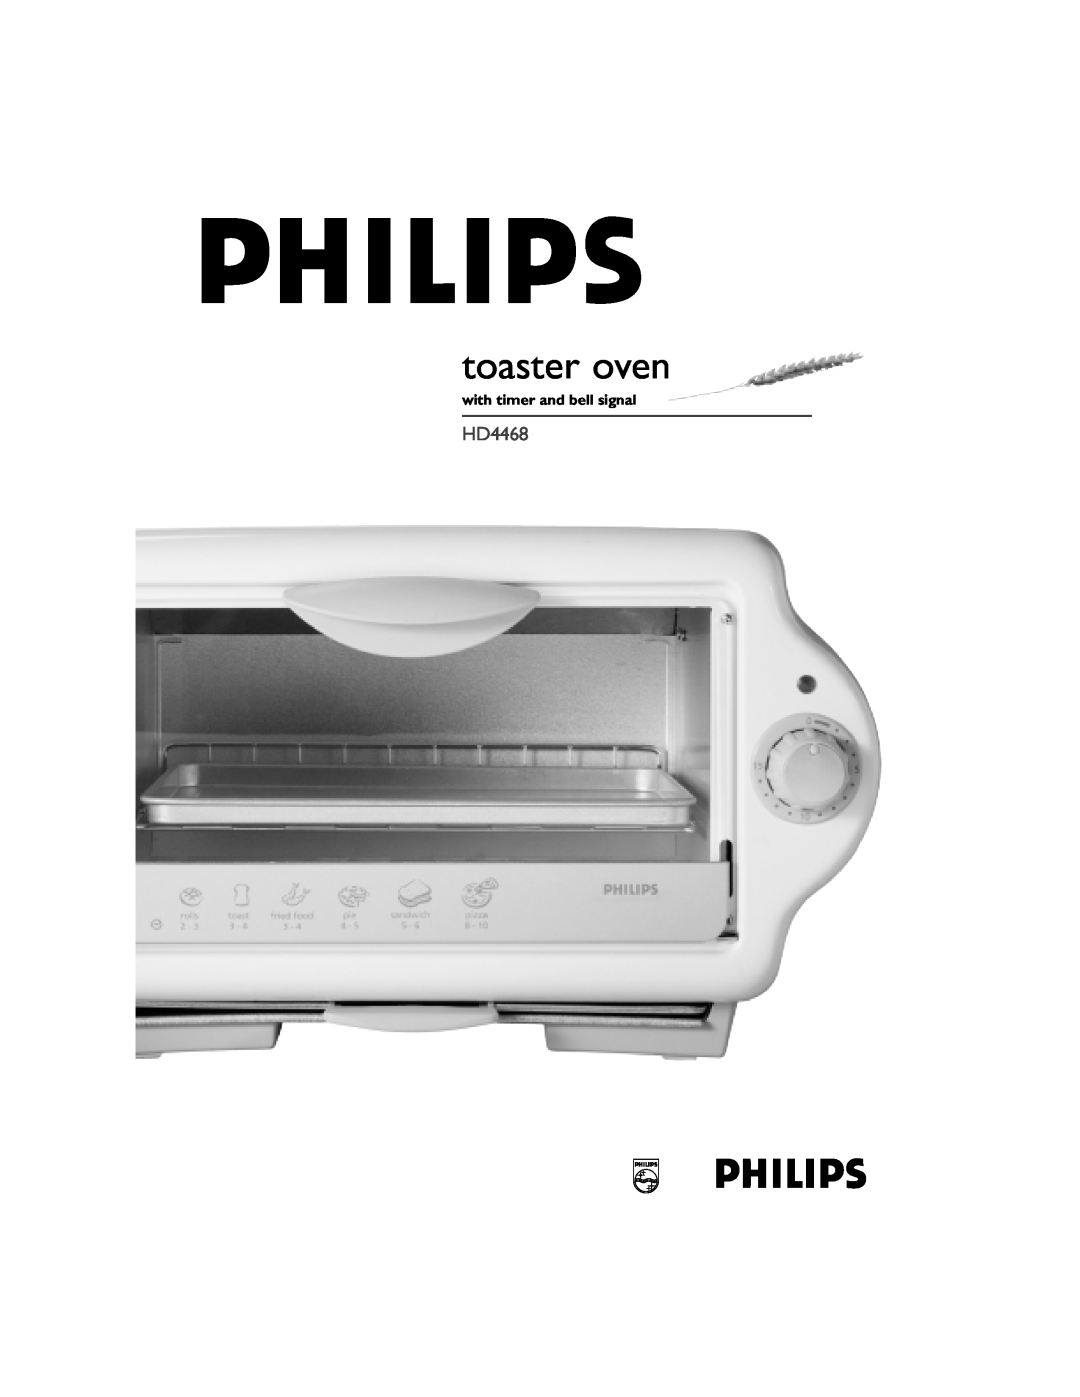 Philips HD4468 manual toaster oven, with timer and bell signal 